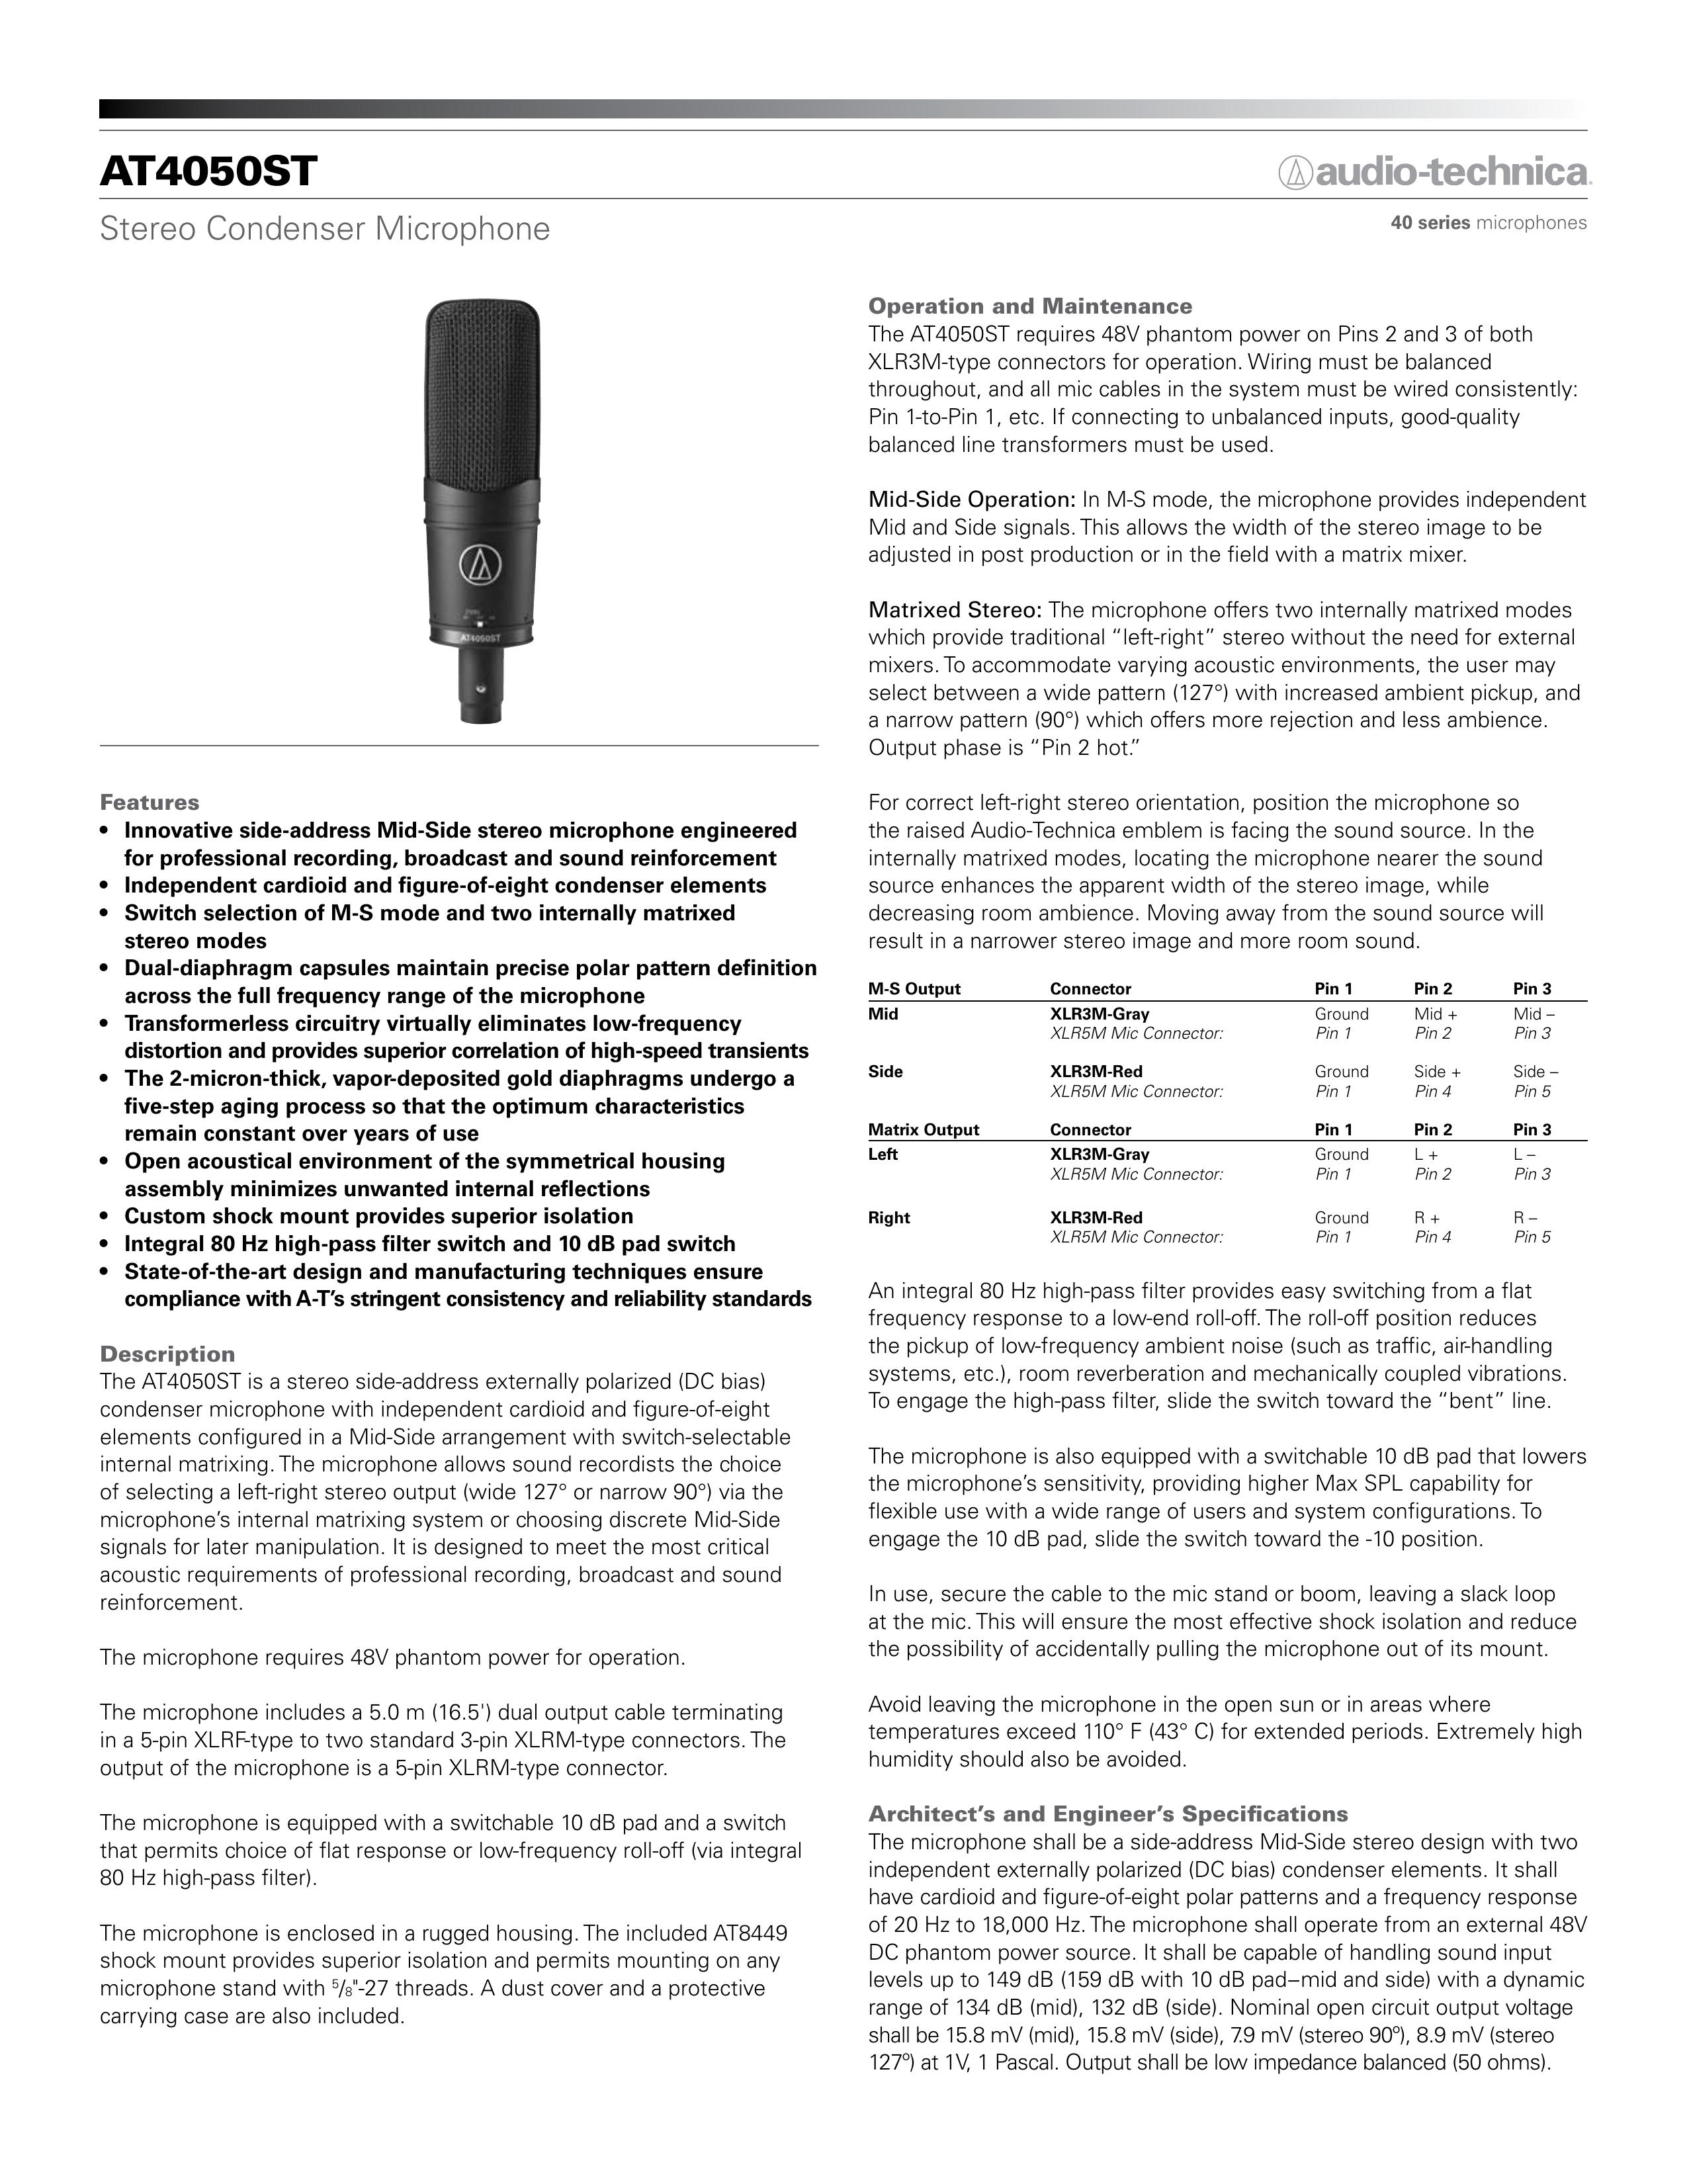 Audio-Technica AT4050ST Microphone User Manual